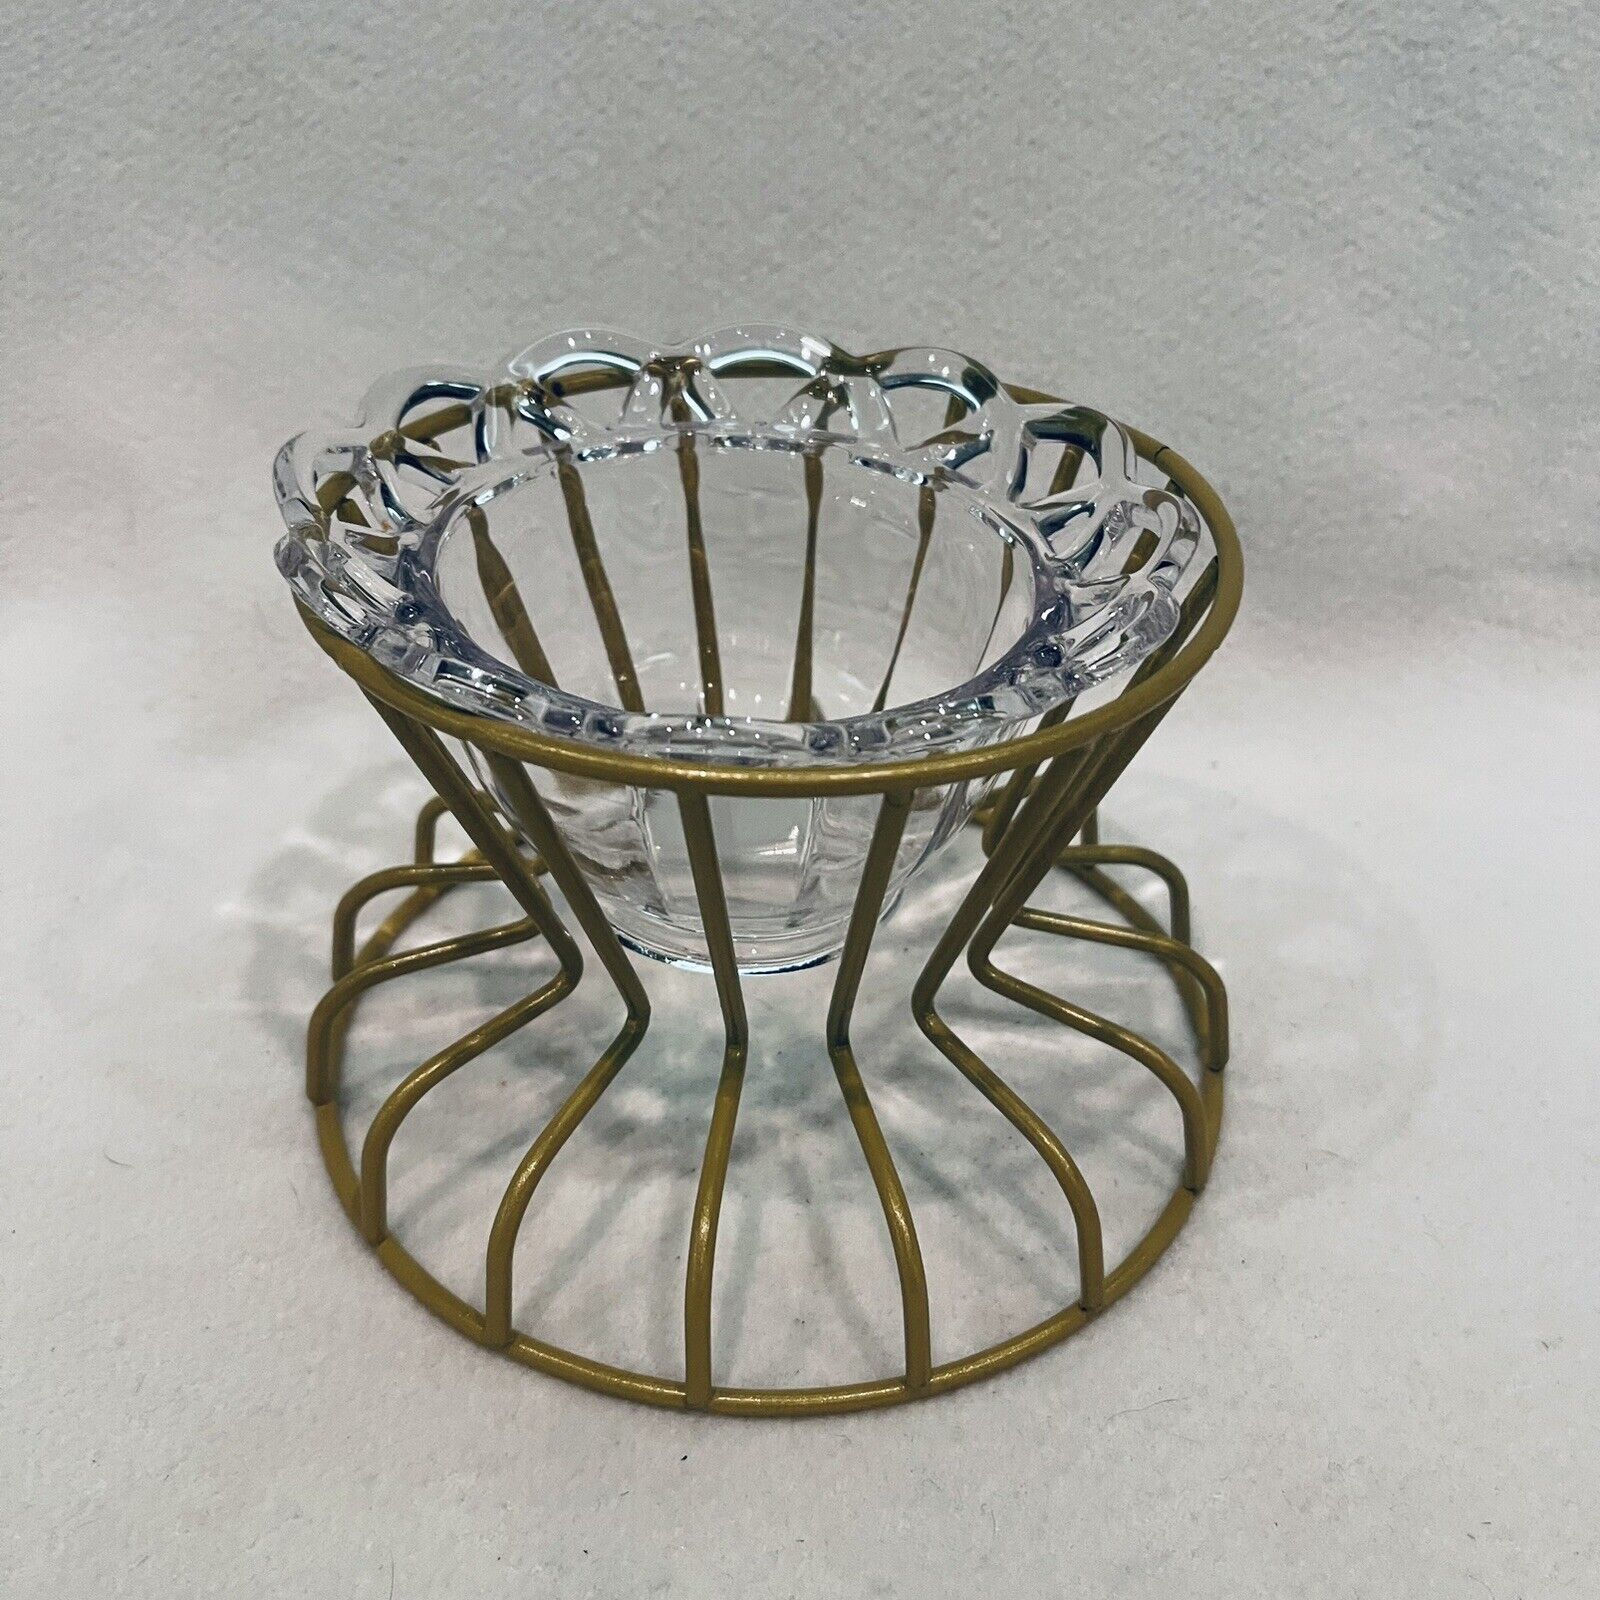 Creative Vintage Gold Metal Stand With Glass Bowl Insert